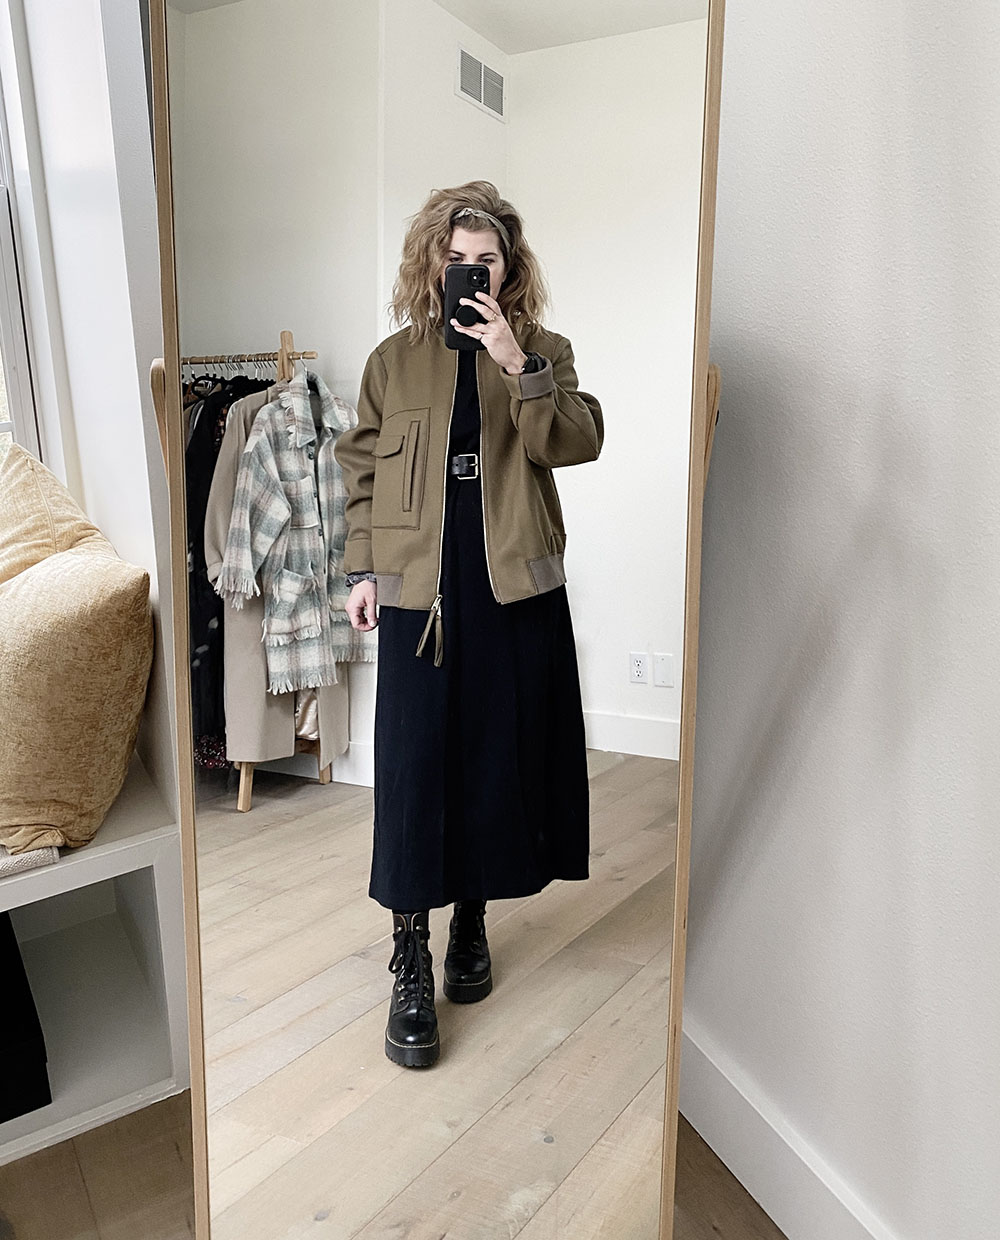 The Best 10 Winter Capsule Wardrobe Outfits - Uncomplicated Spaces